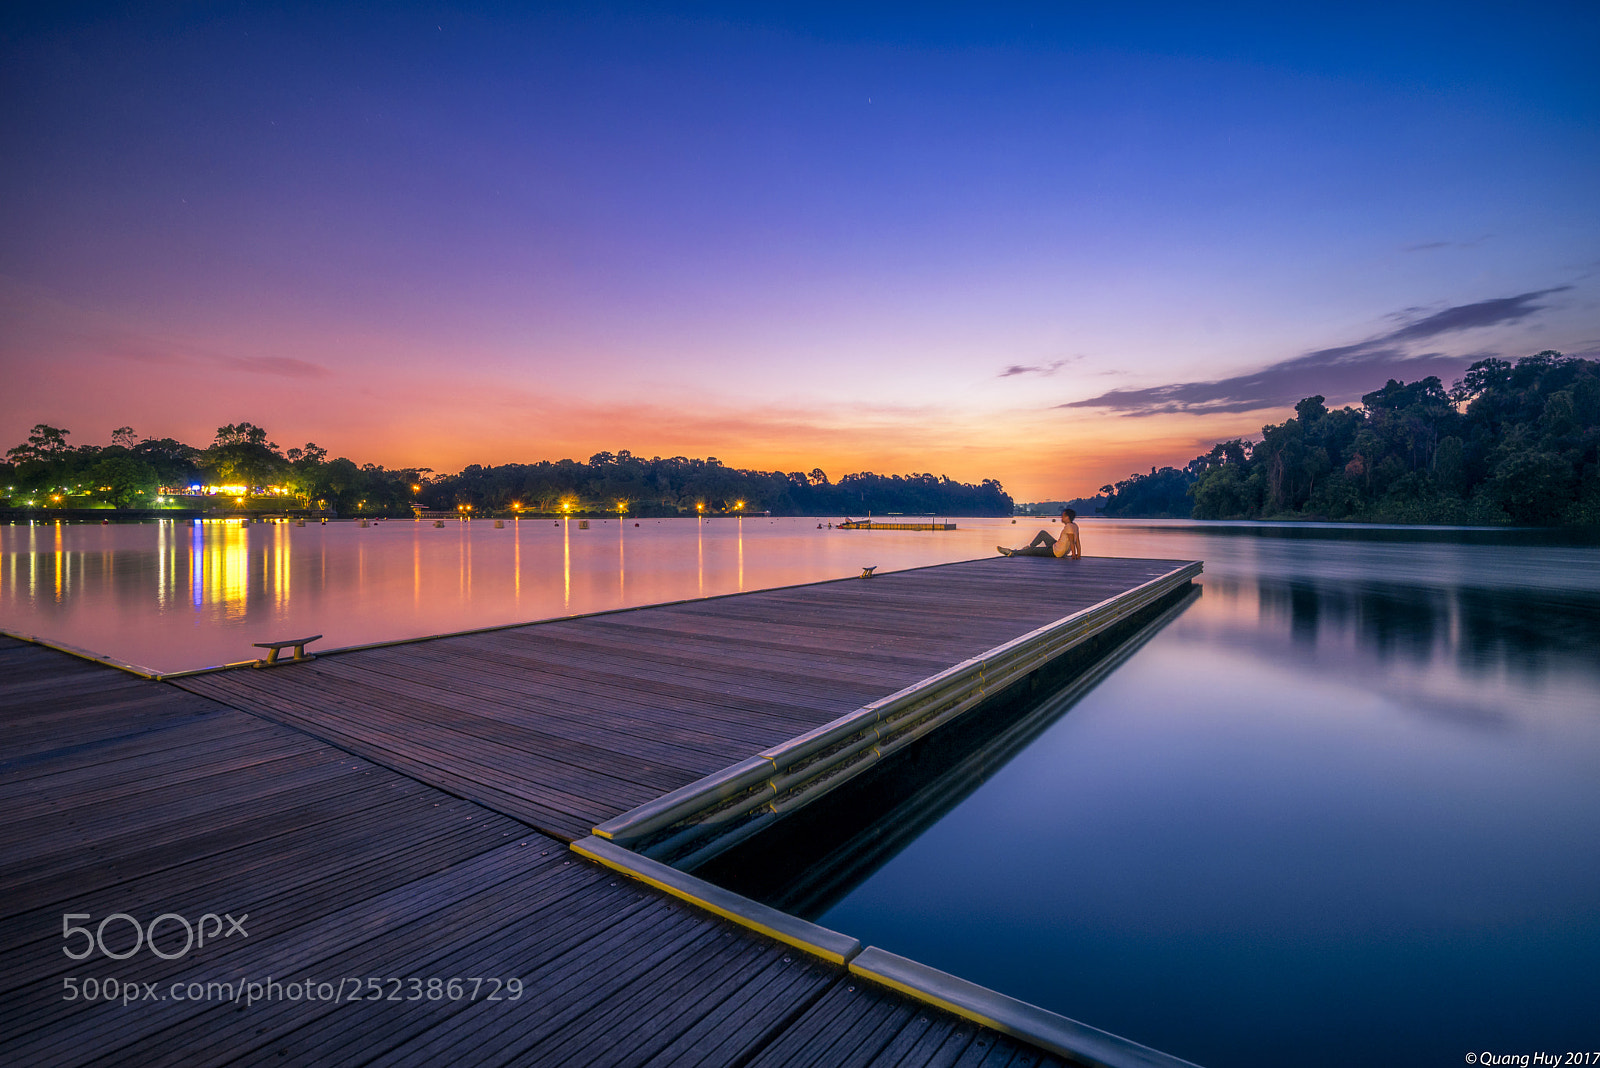 Sony a7R sample photo. Macritchie alone&sunset photography